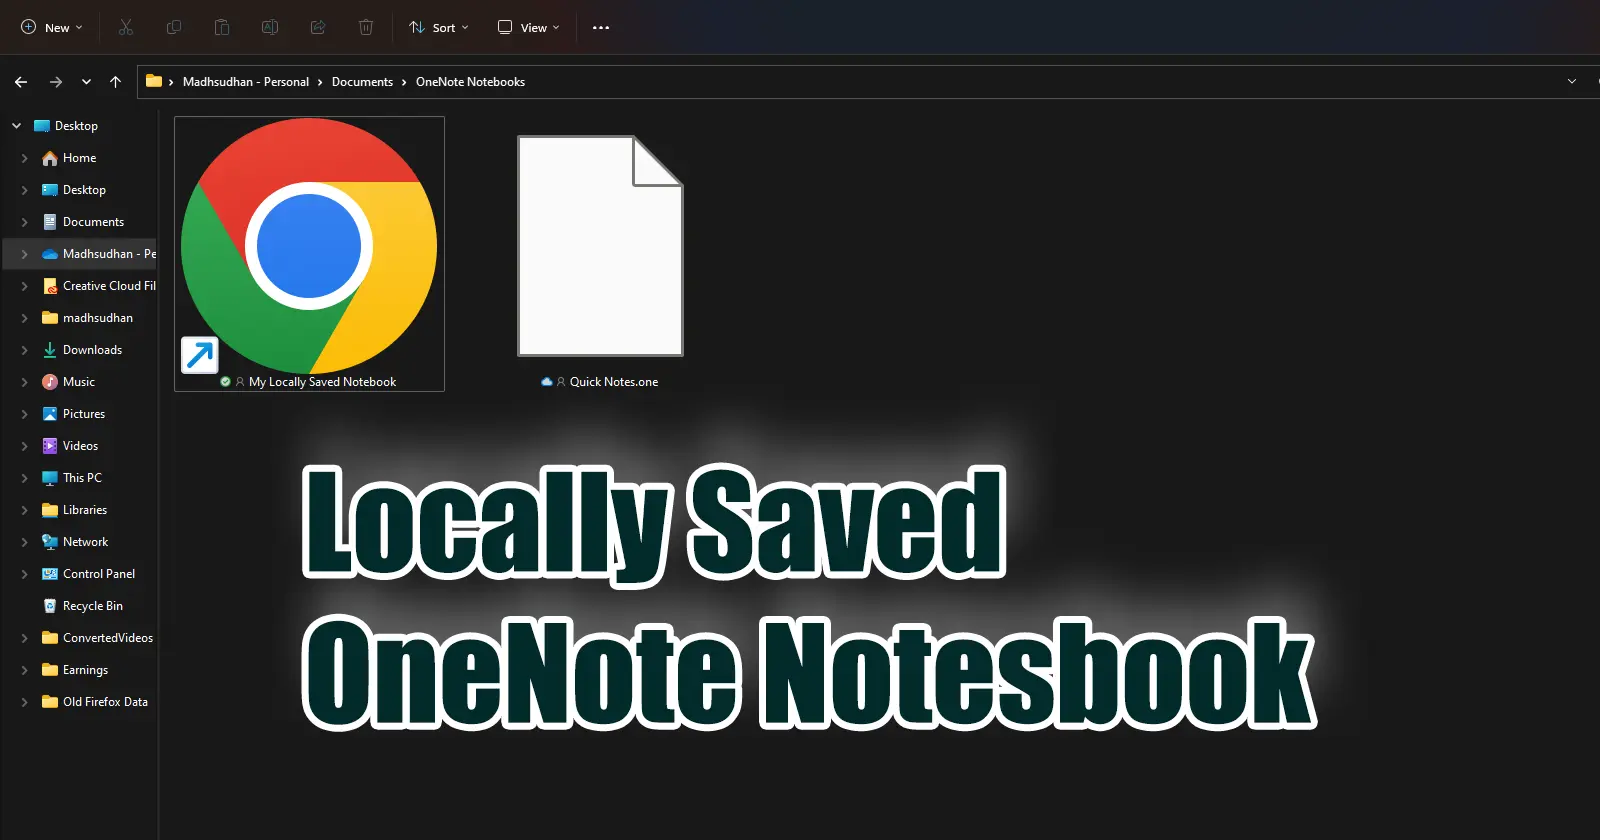 How to Save OneNote Notes Locally